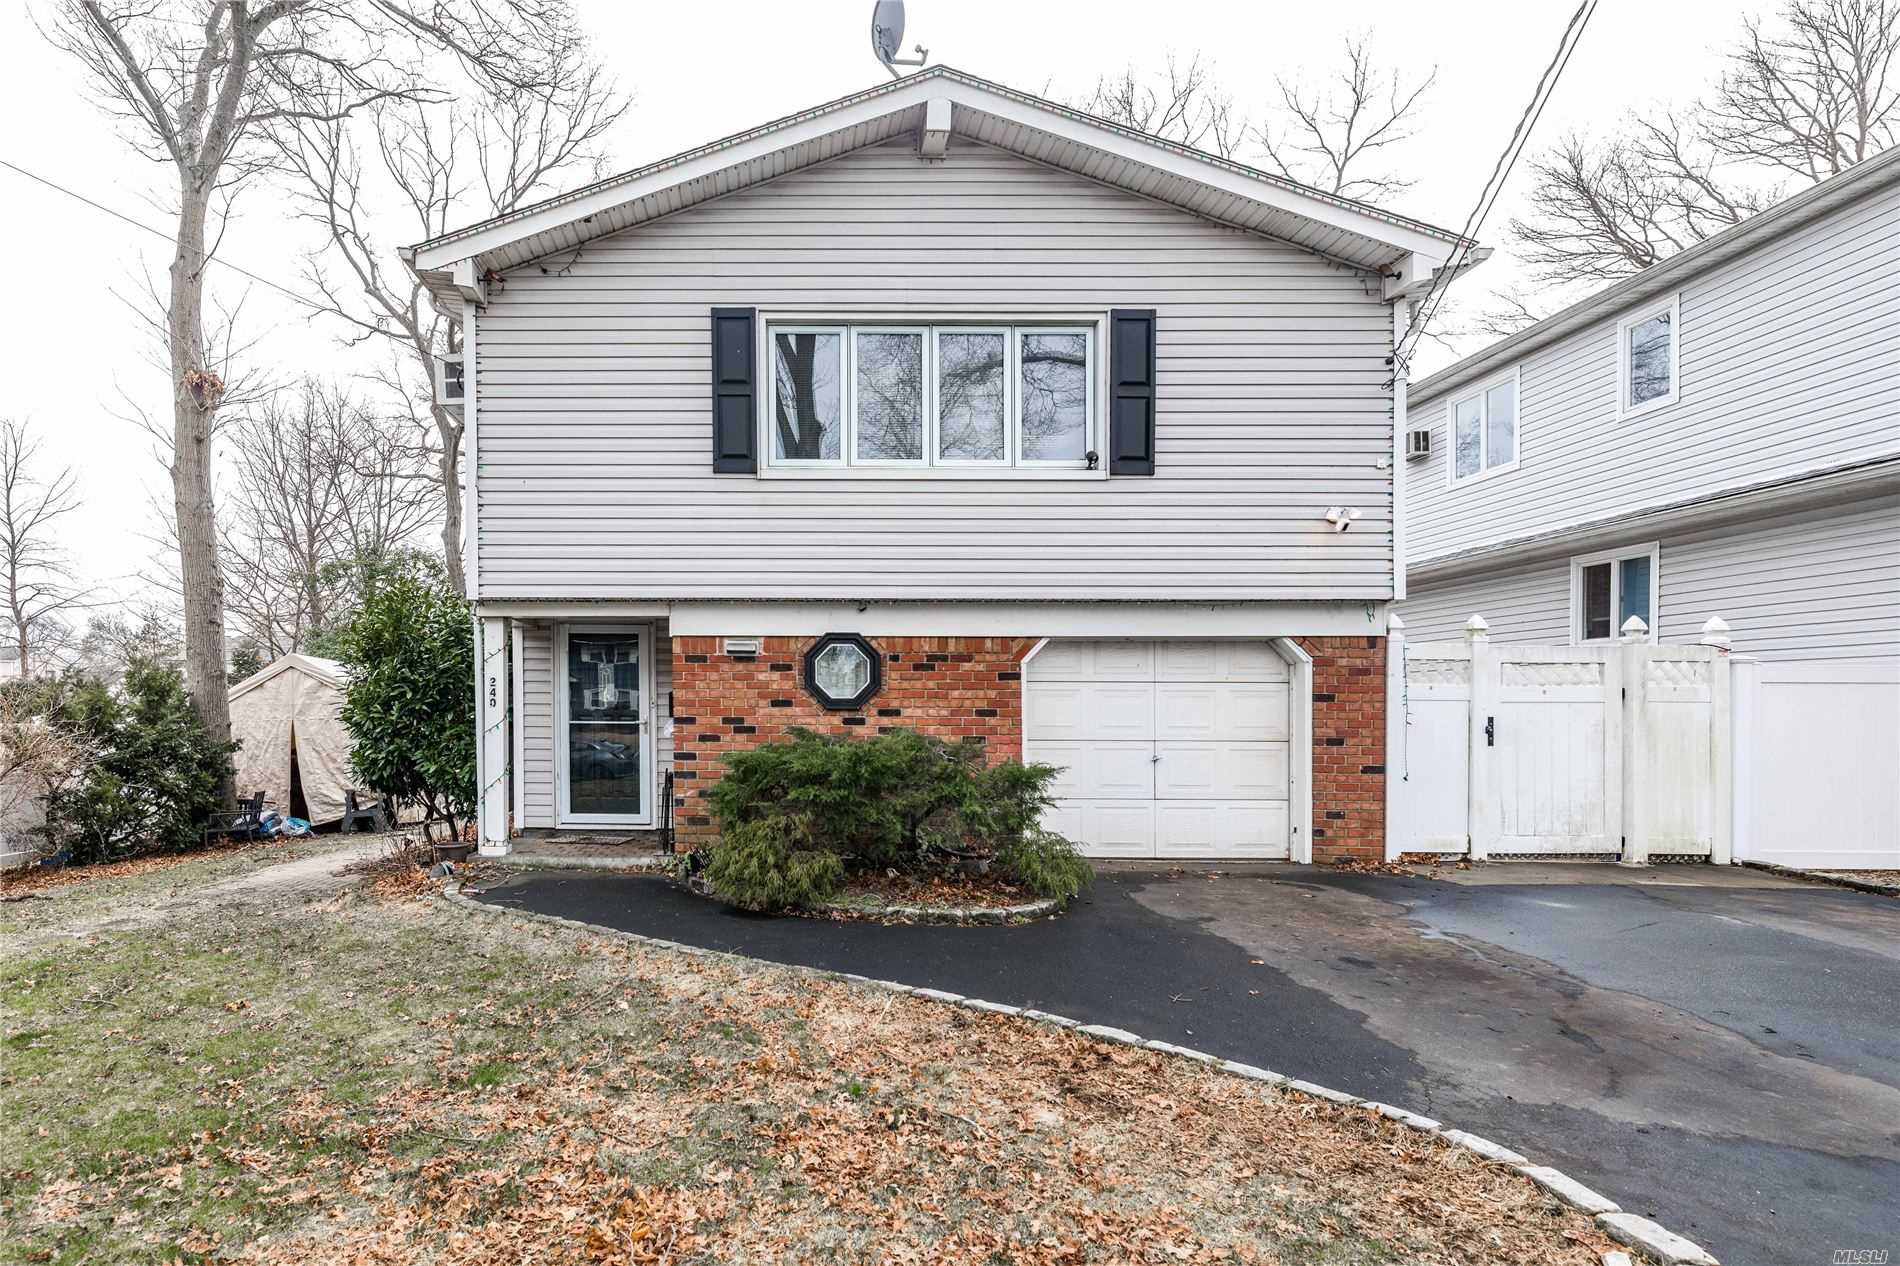 This is a unique property, Legal Accessory Apt, by permit, Big property. So much potential for large or extended family or income producing, Oil heat, Gas for cooking(propane) Updated Baths, Radiant heat in upstairs bath, Wood floors throughout, Nice size rooms, A must see, Priced to sell